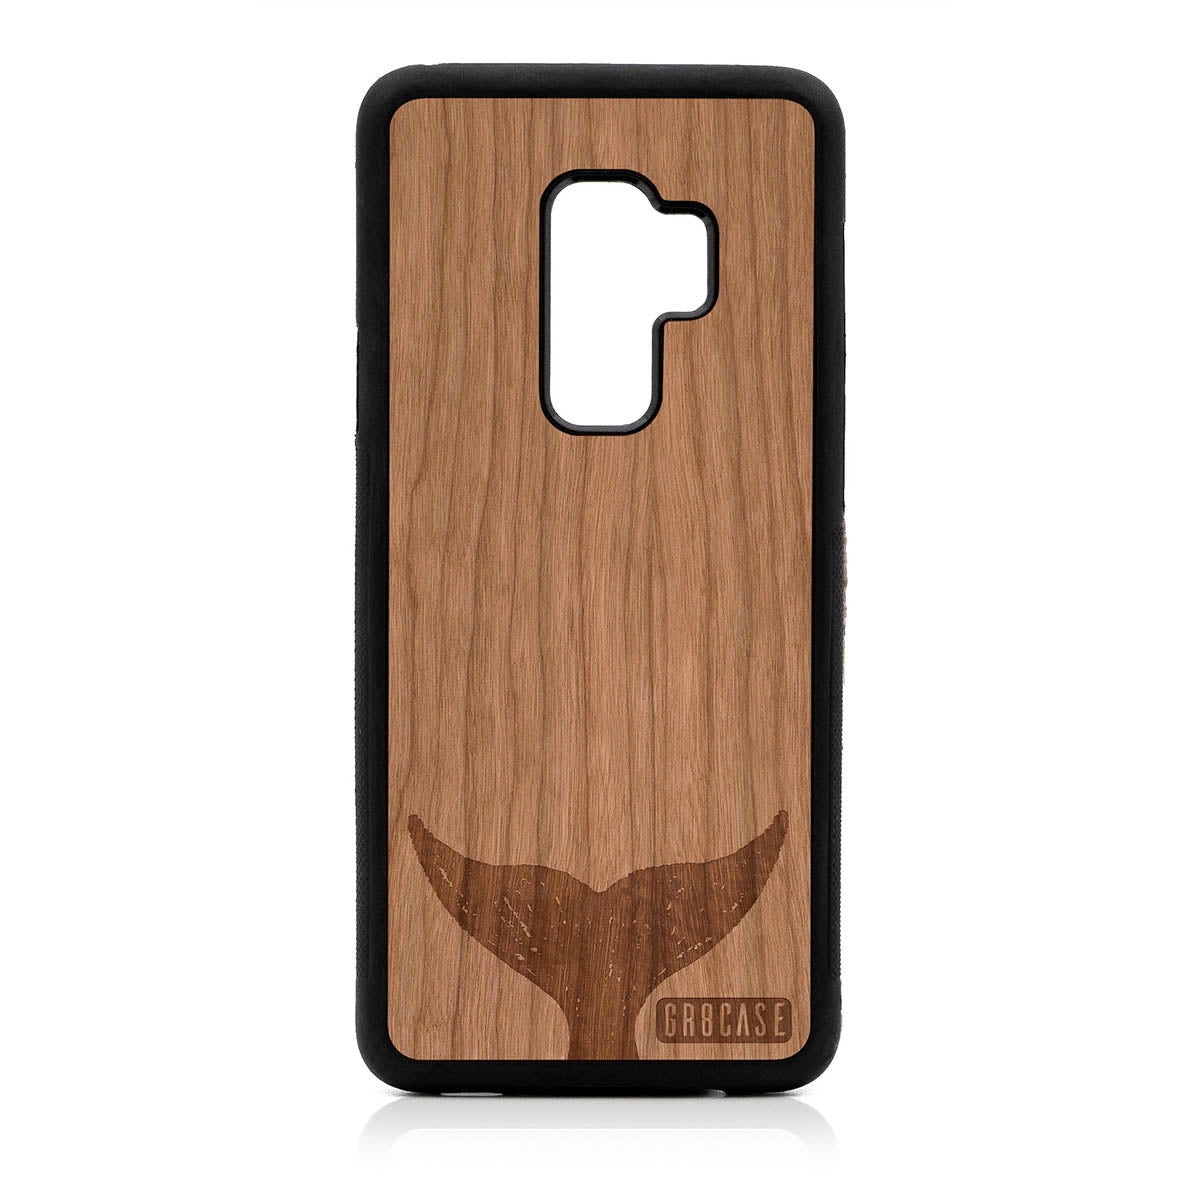 Whale Tail Design Wood Case For Samsung Galaxy S9 Plus